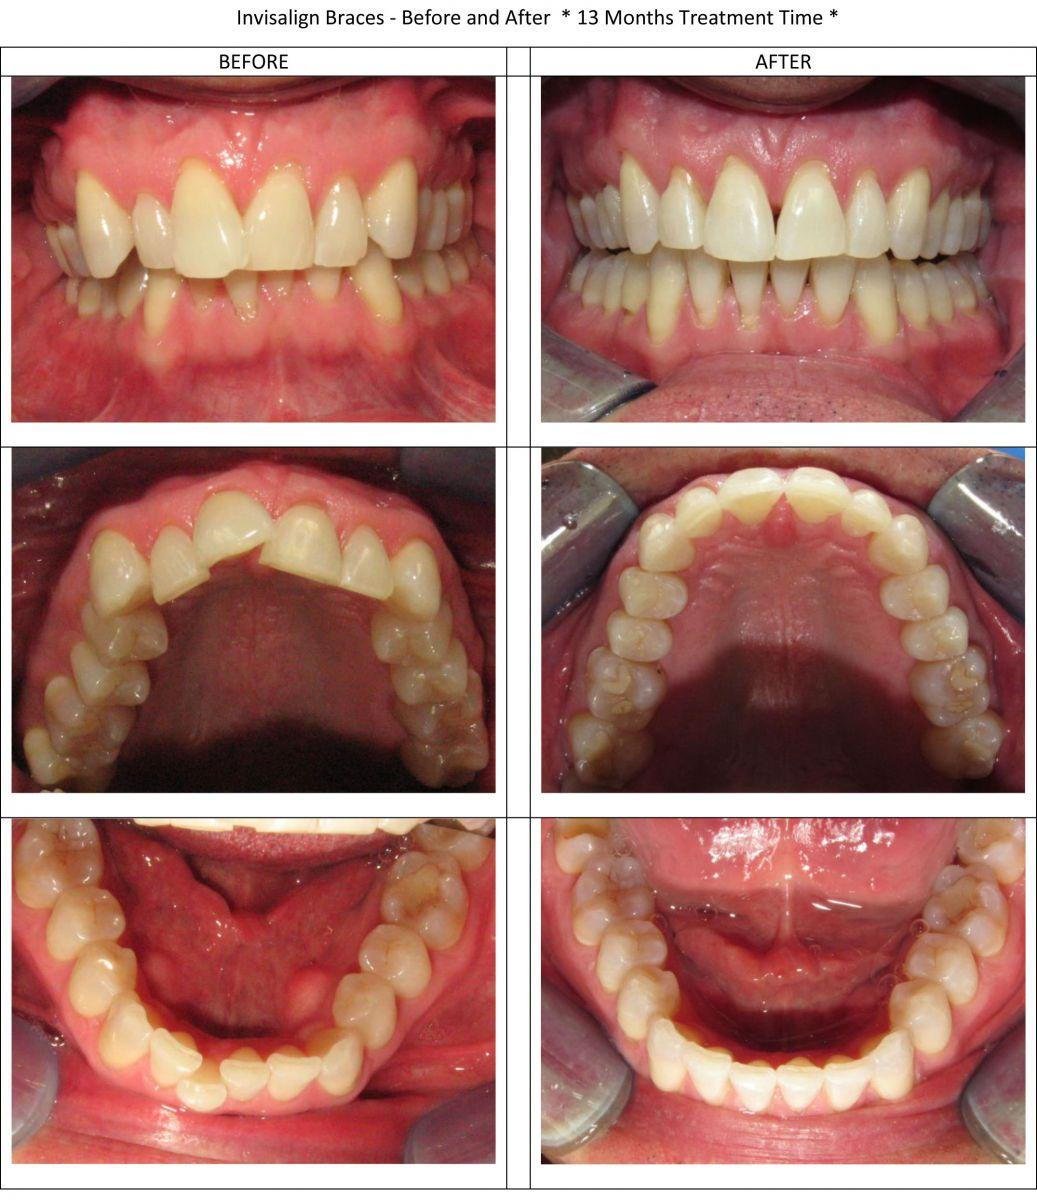 Invisalign Complete in 13 mos